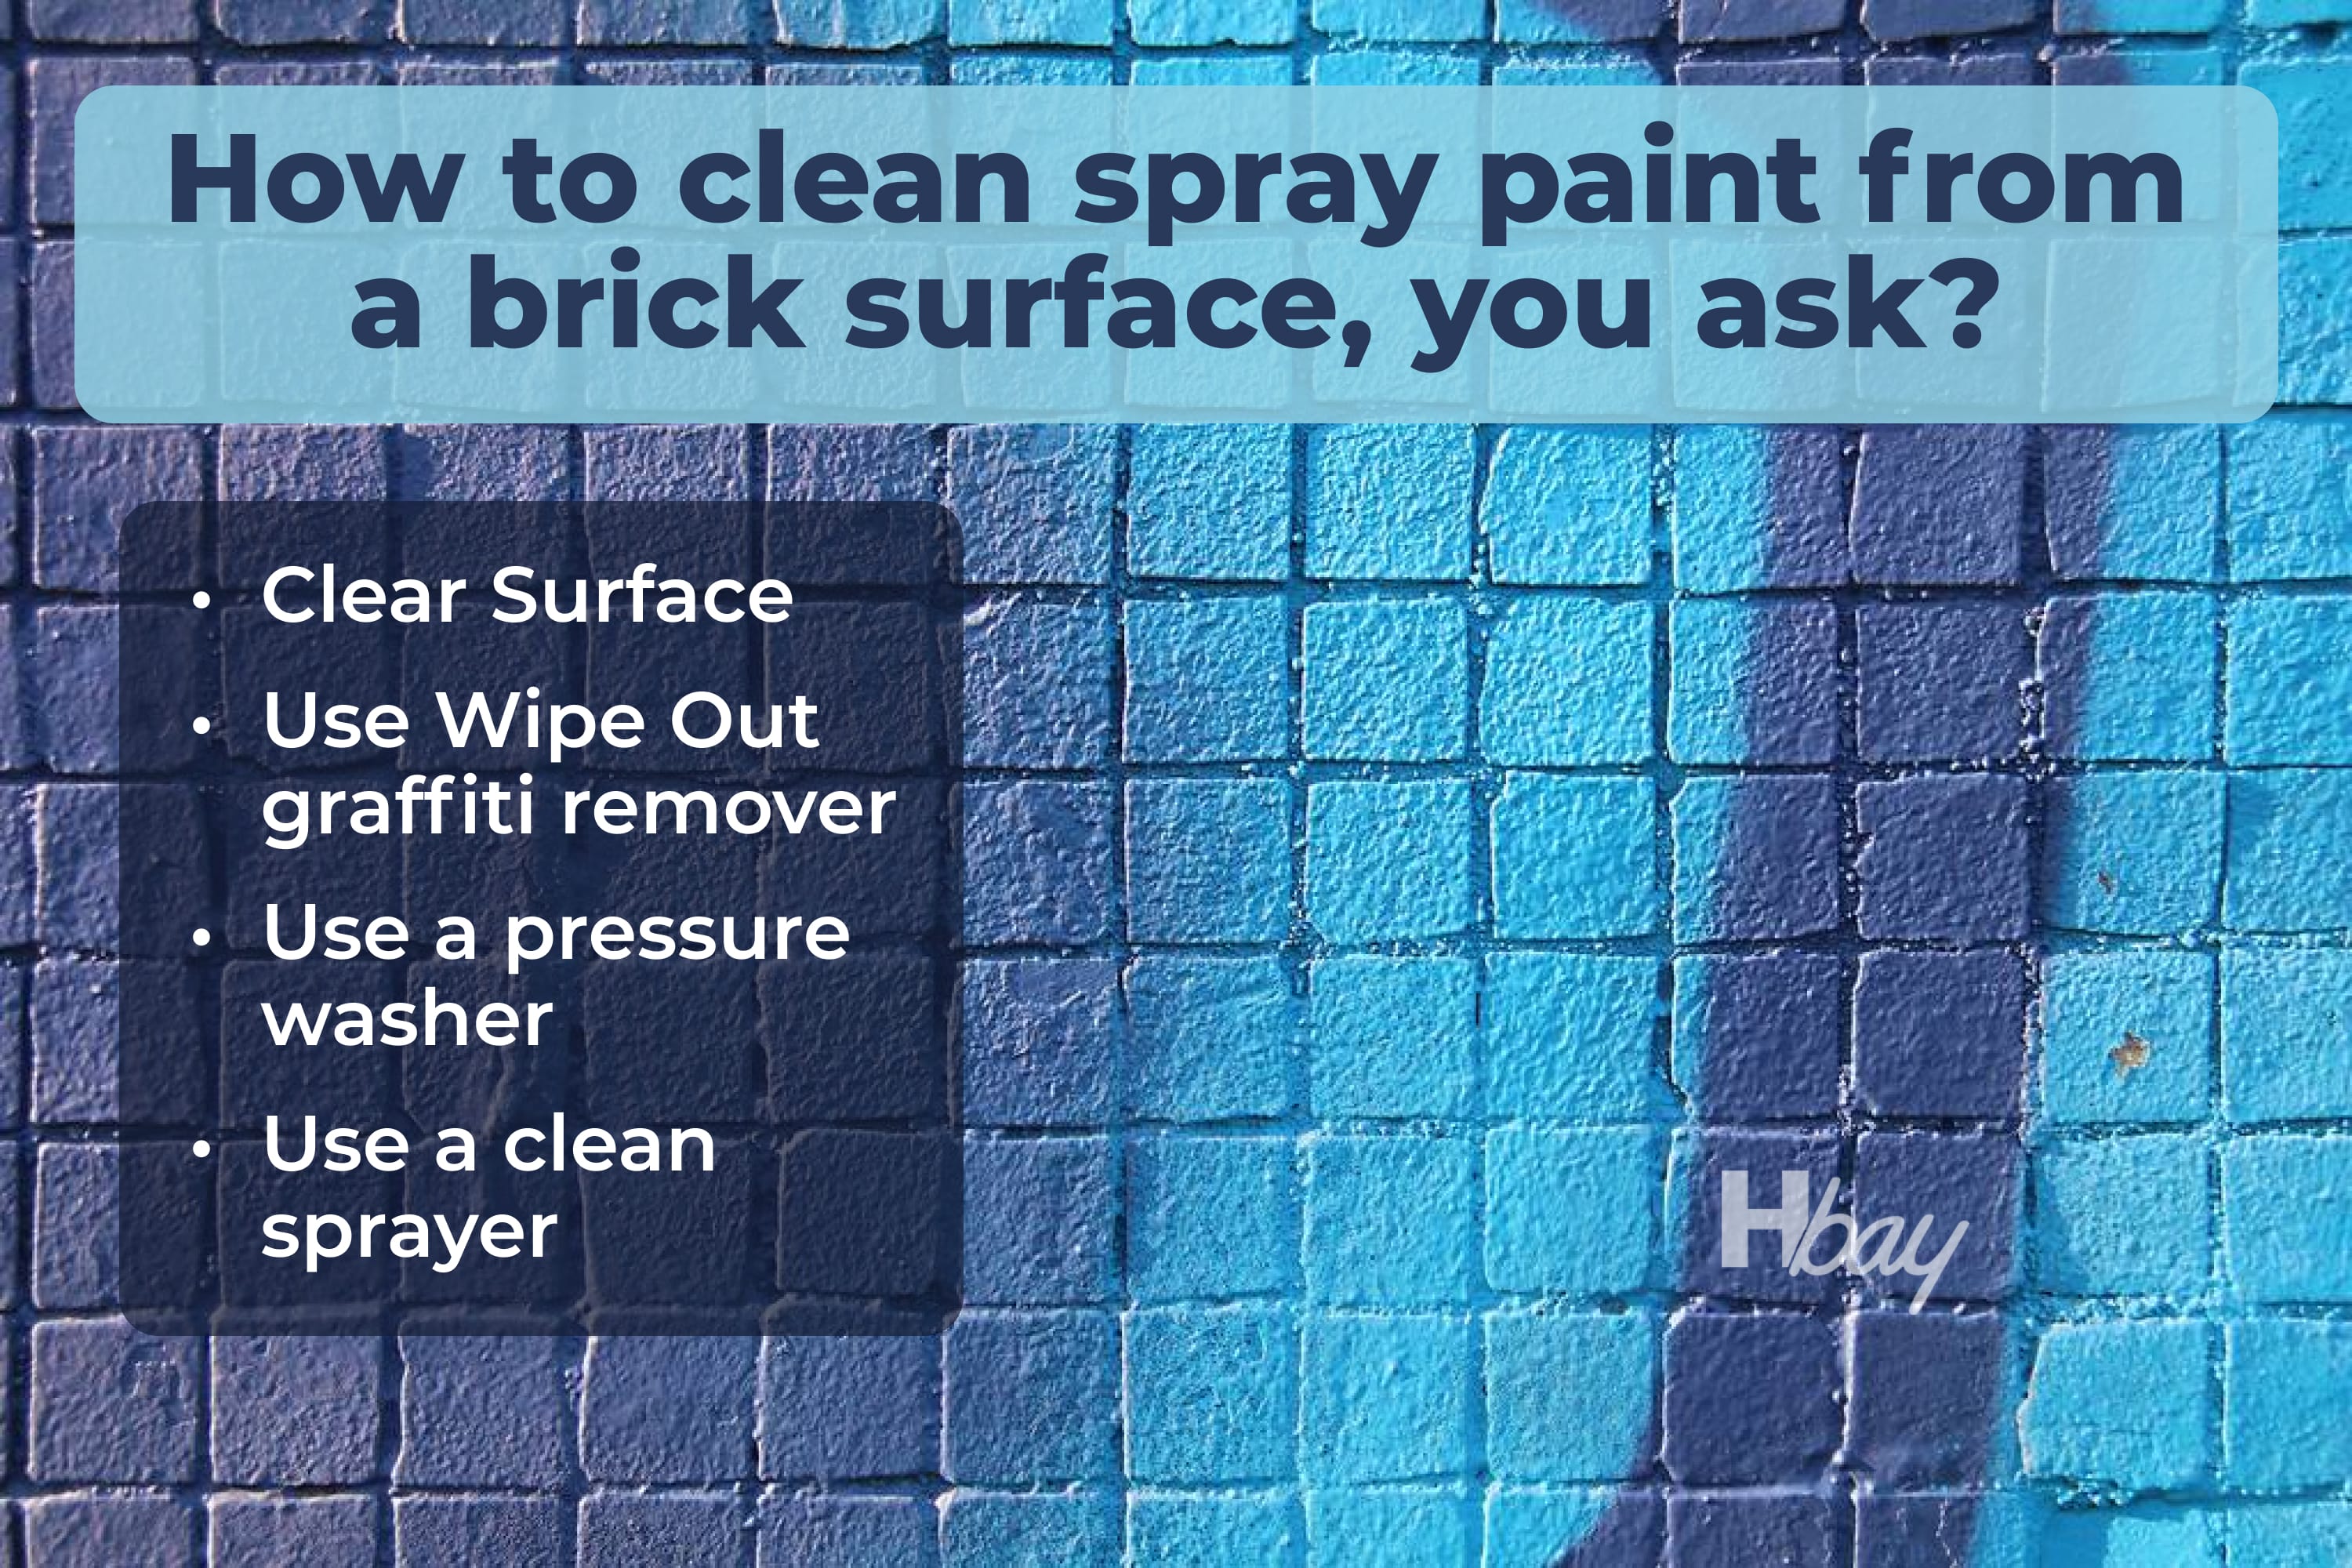 How to Remove Spray Paint From Brick